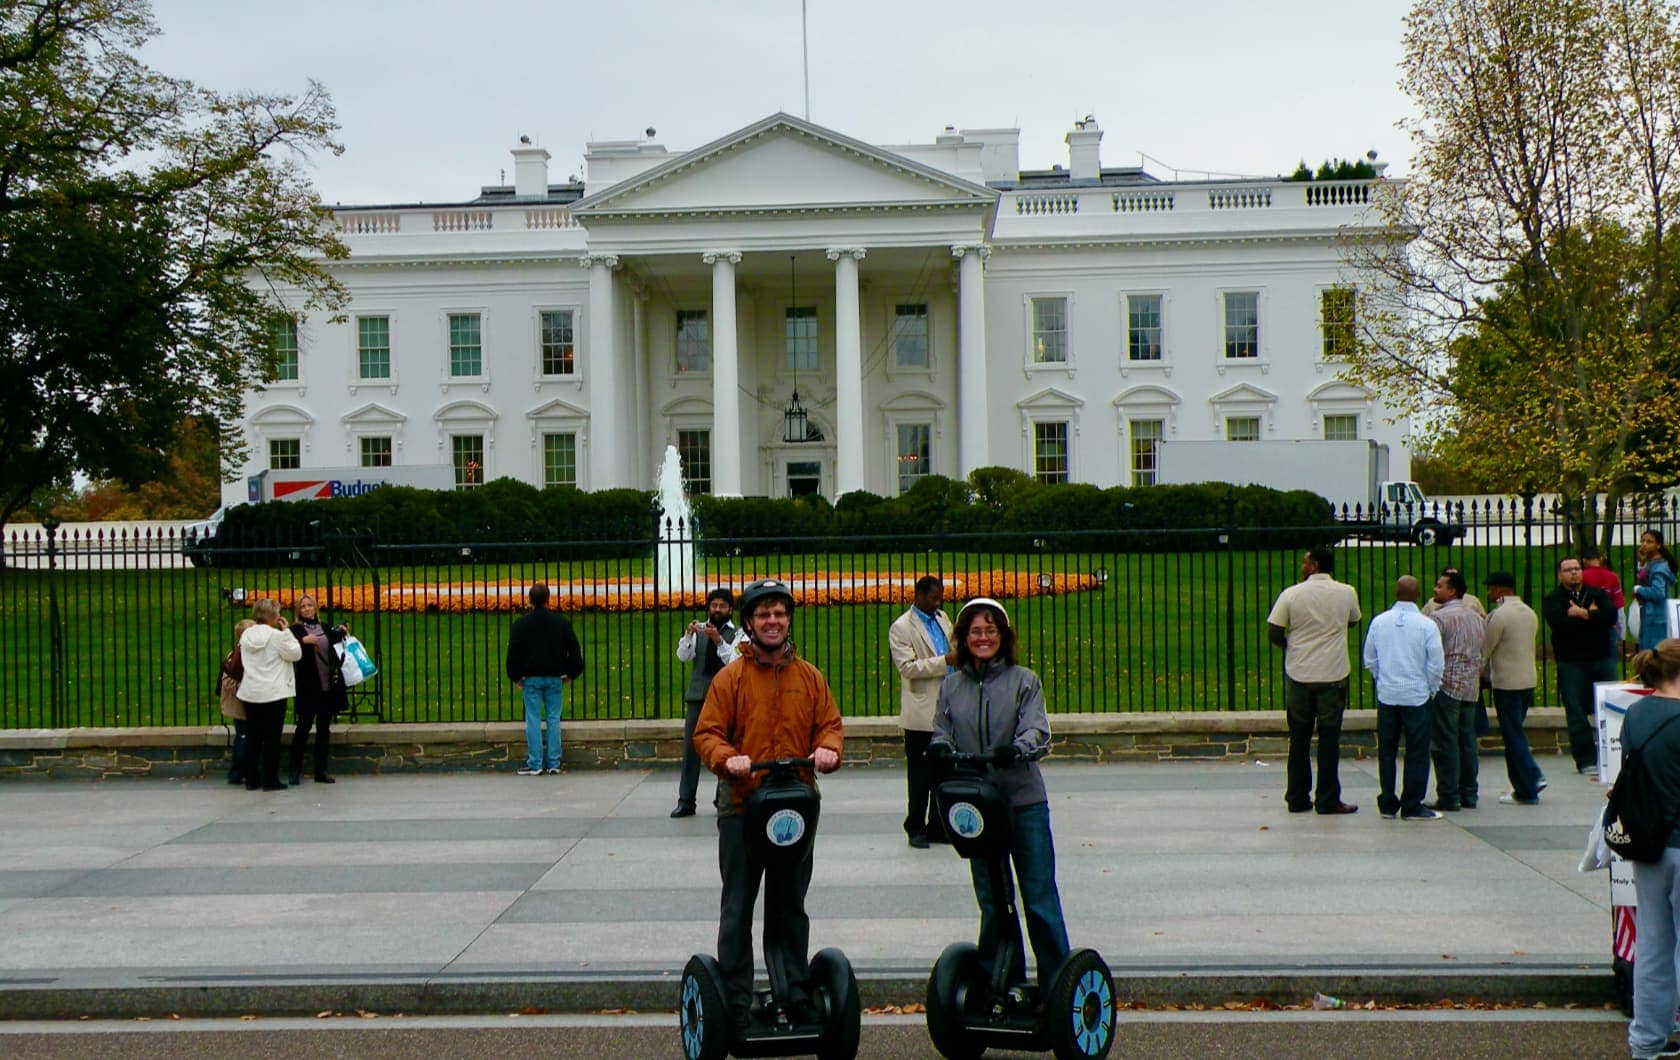 Man and woman on segways in front of US White House